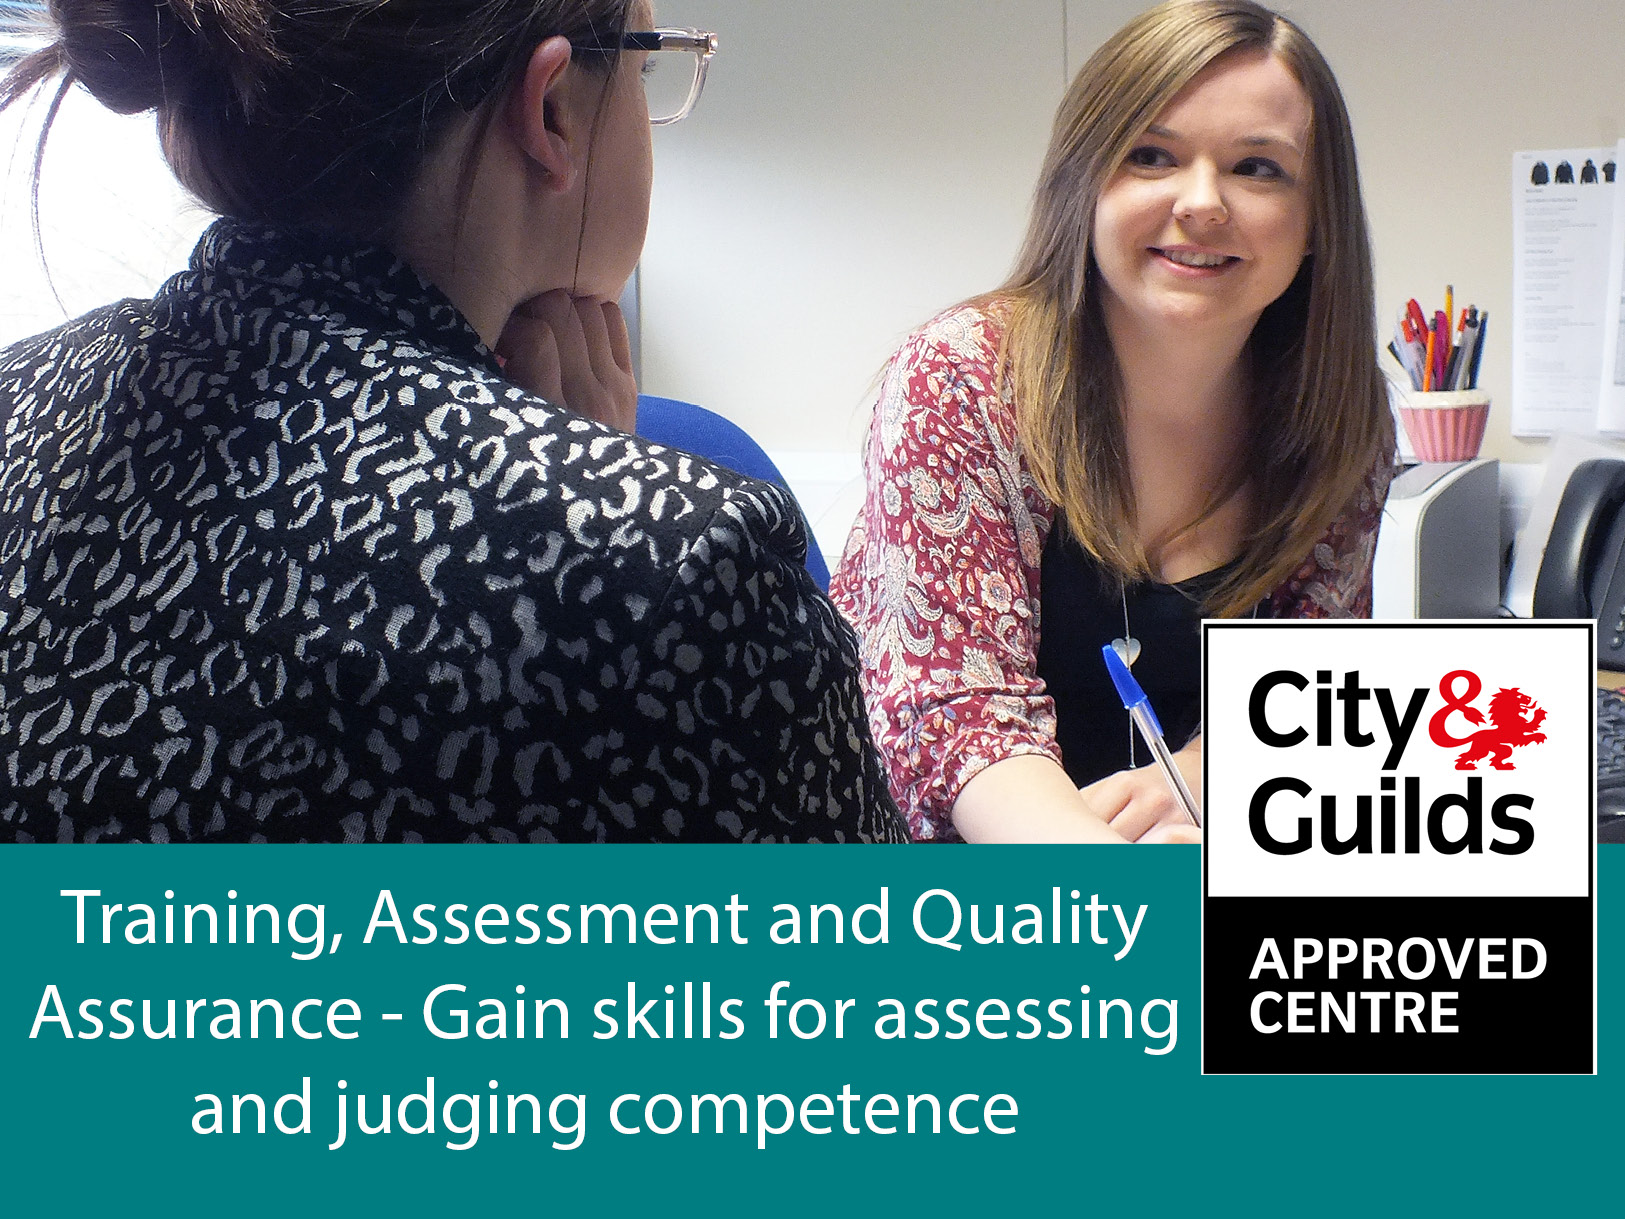 Training Assessment and Quality Assurance - Gain skills for assessing and judging competence